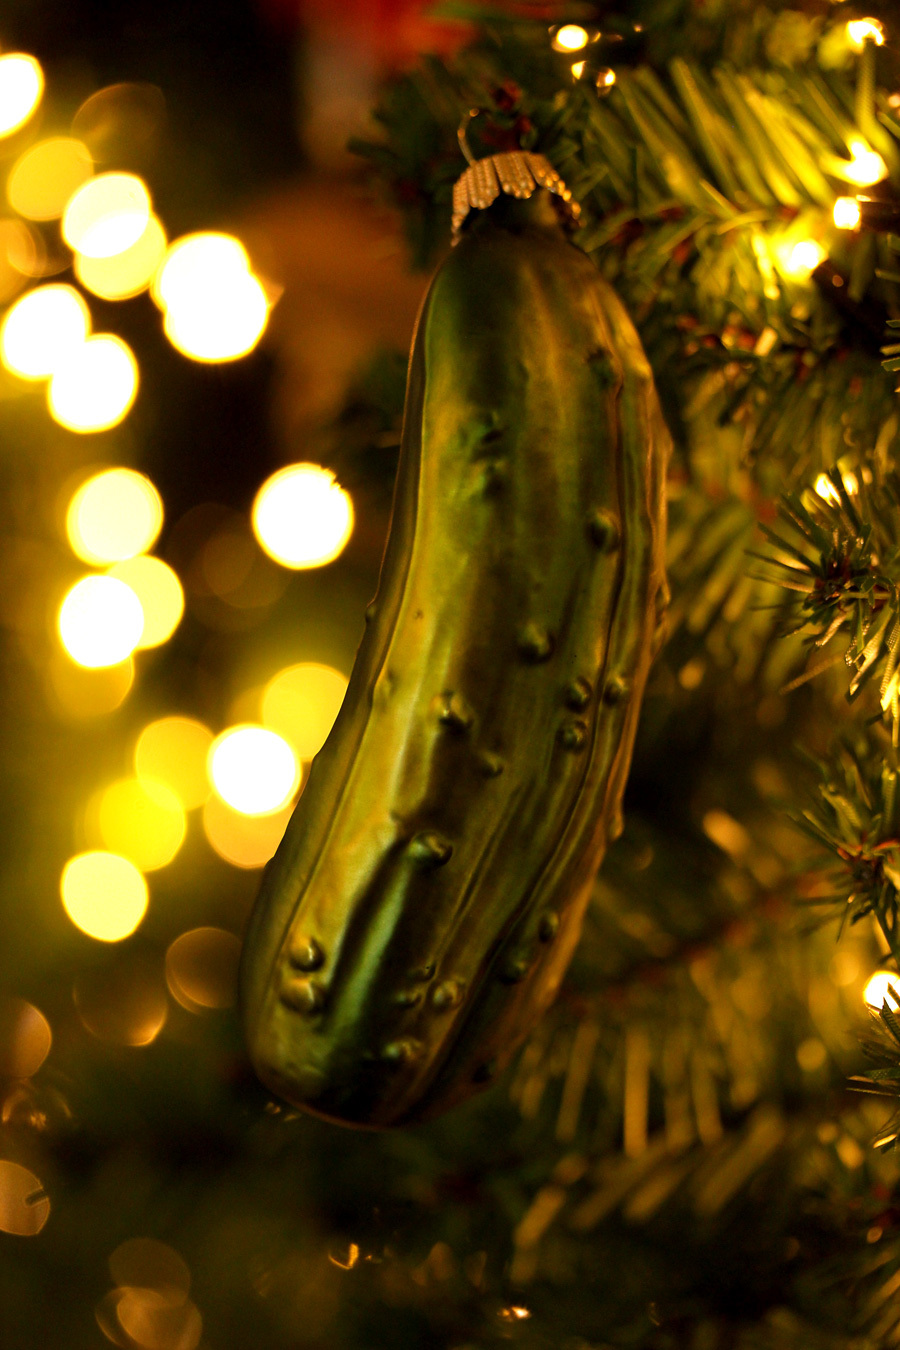 The Christmas pickle